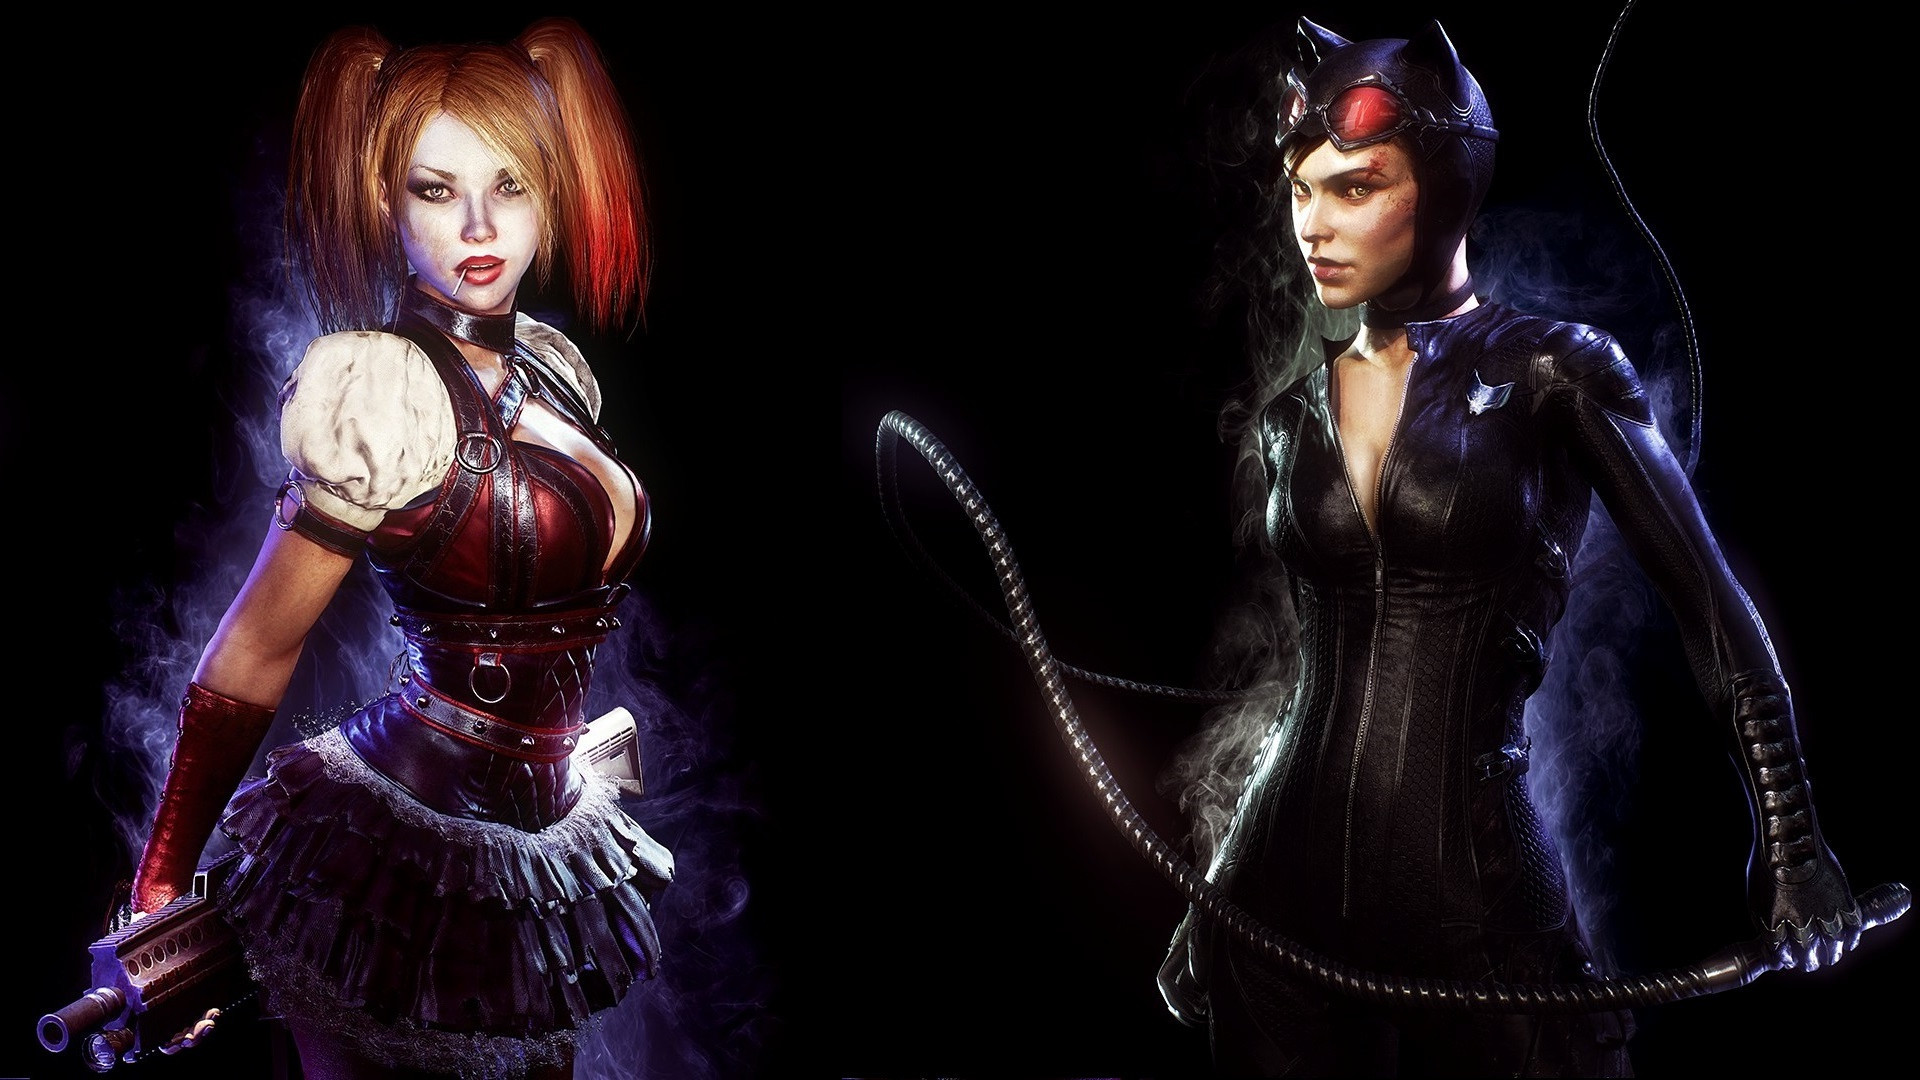 1920x1080 ... Catwoman and Harley Quinn - Arkham Knight 5 by solarnova1101